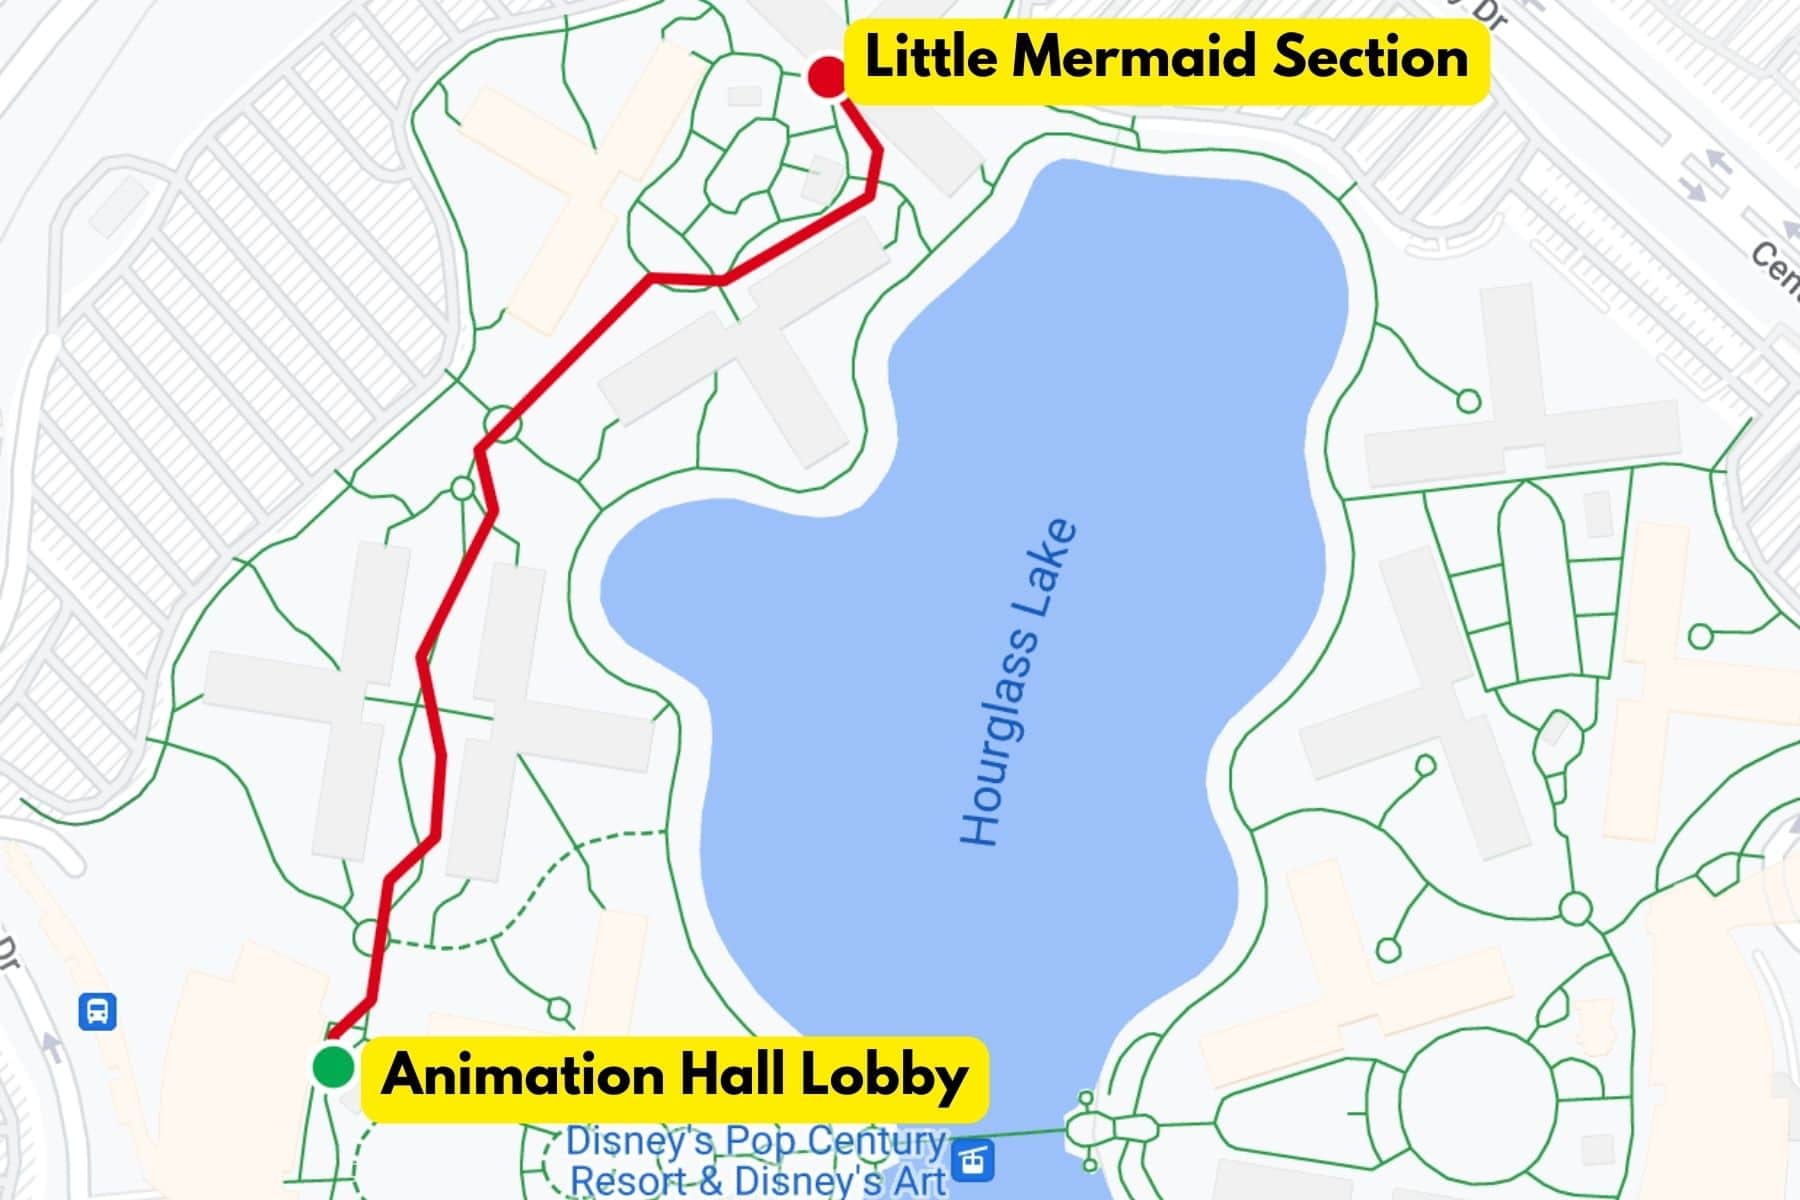 a map that shows the walking distance from Animation Hall to the Little Mermaid section 